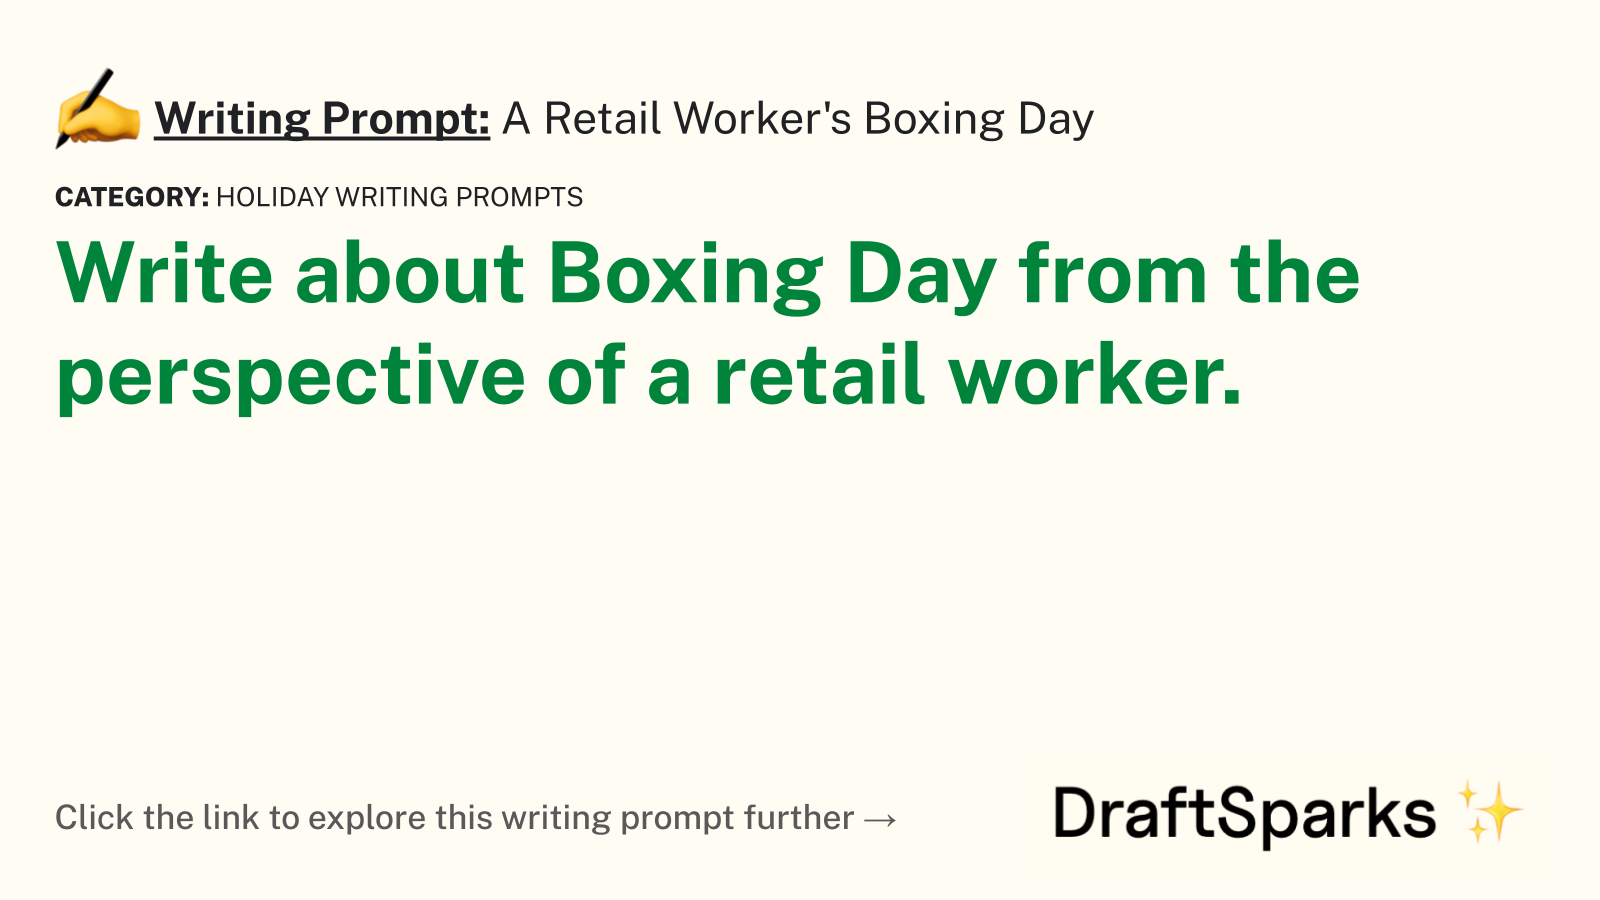 A Retail Worker’s Boxing Day